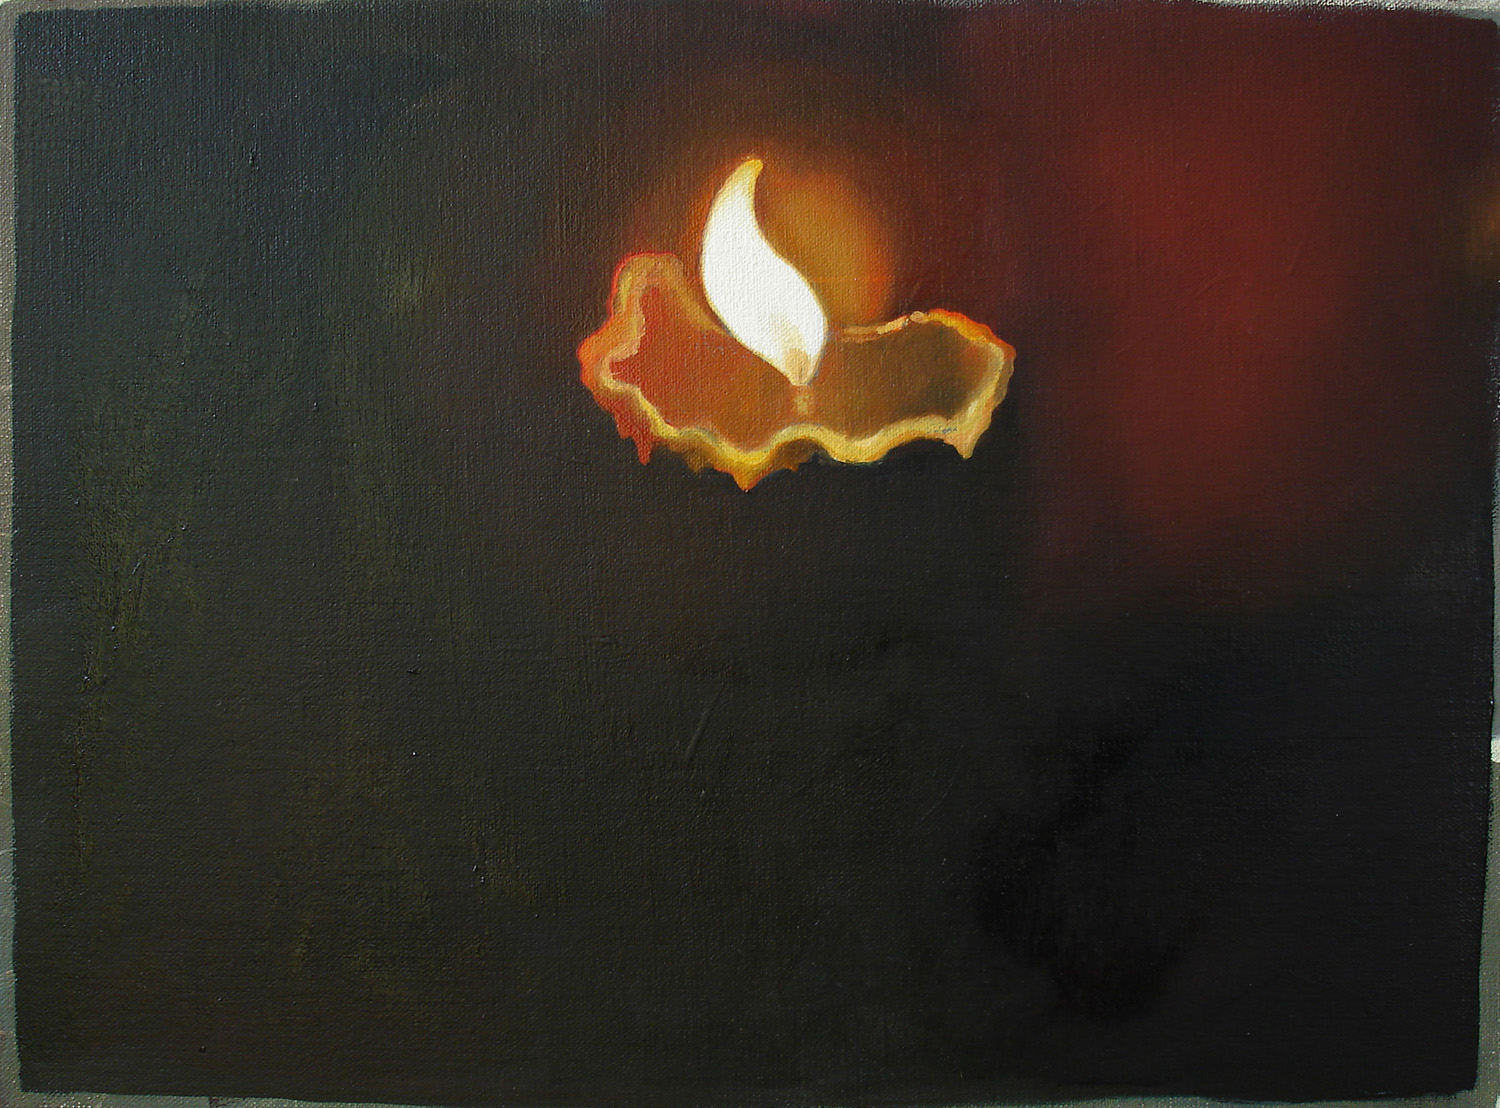   Candle    2007, oil on canvas, 24 x32cm  